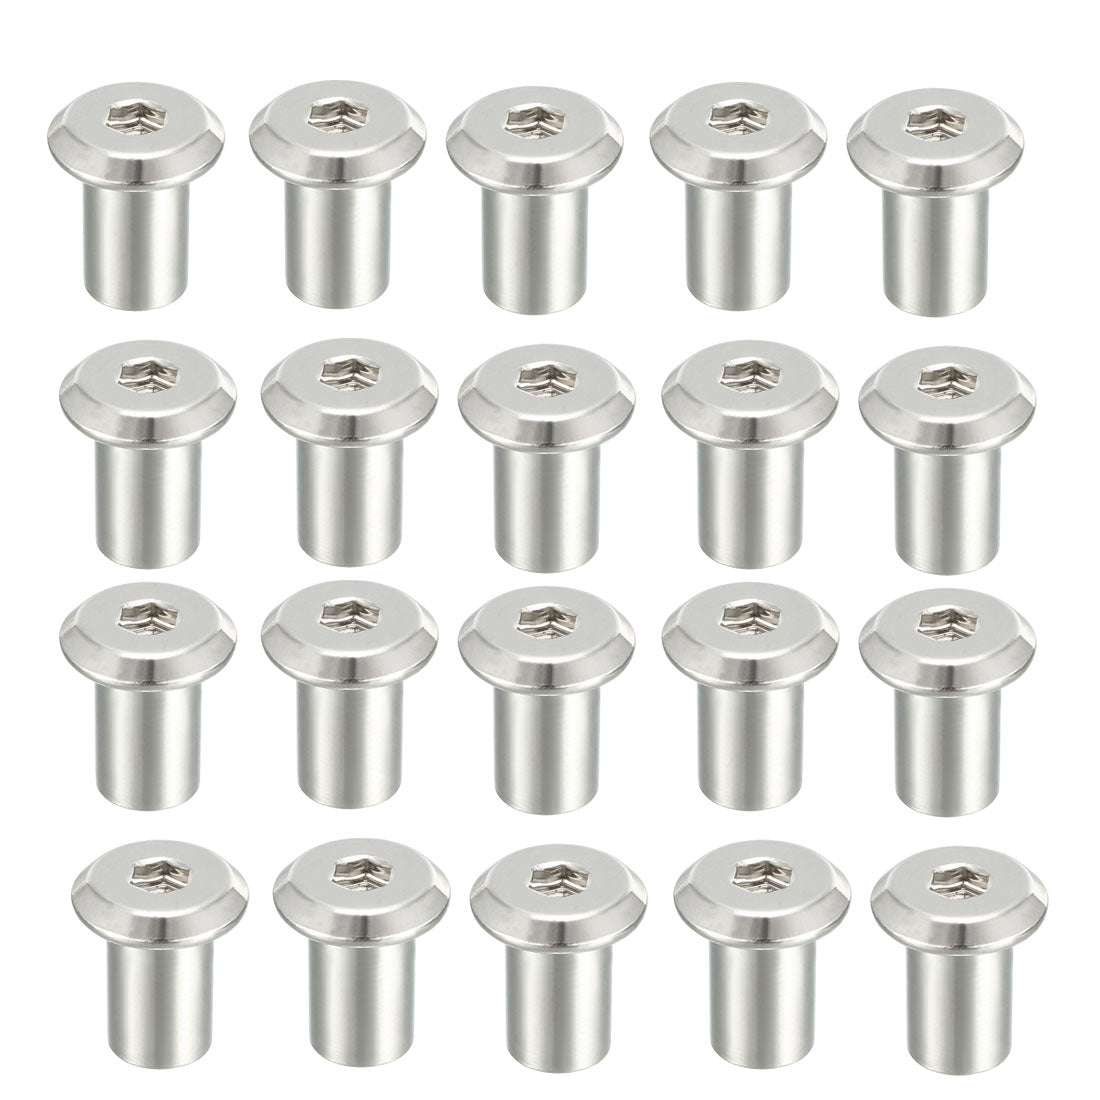 uxcell Uxcell M6x12mm Hex Socket Head Insert Nut Screw Post Sleeve Nut for Furniture 20pcs